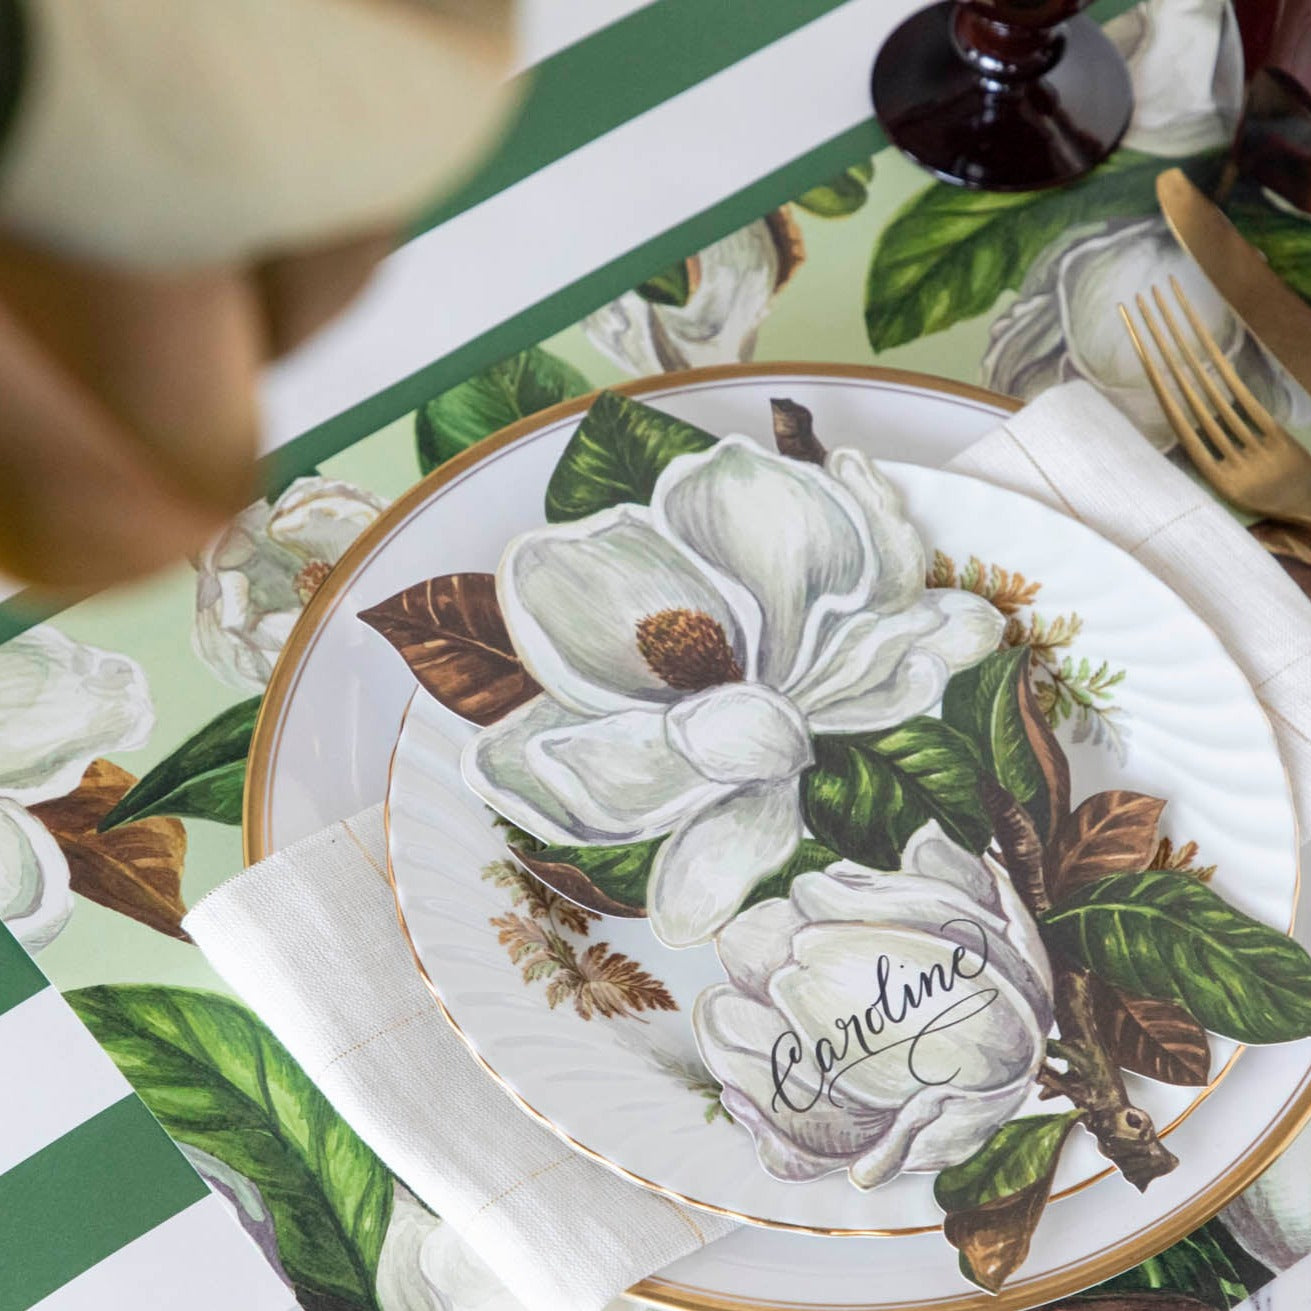 Hester &amp; Cook Mint Magnolia Blooms Placemat place setting with paper placemats for Thanksgiving in the USA.